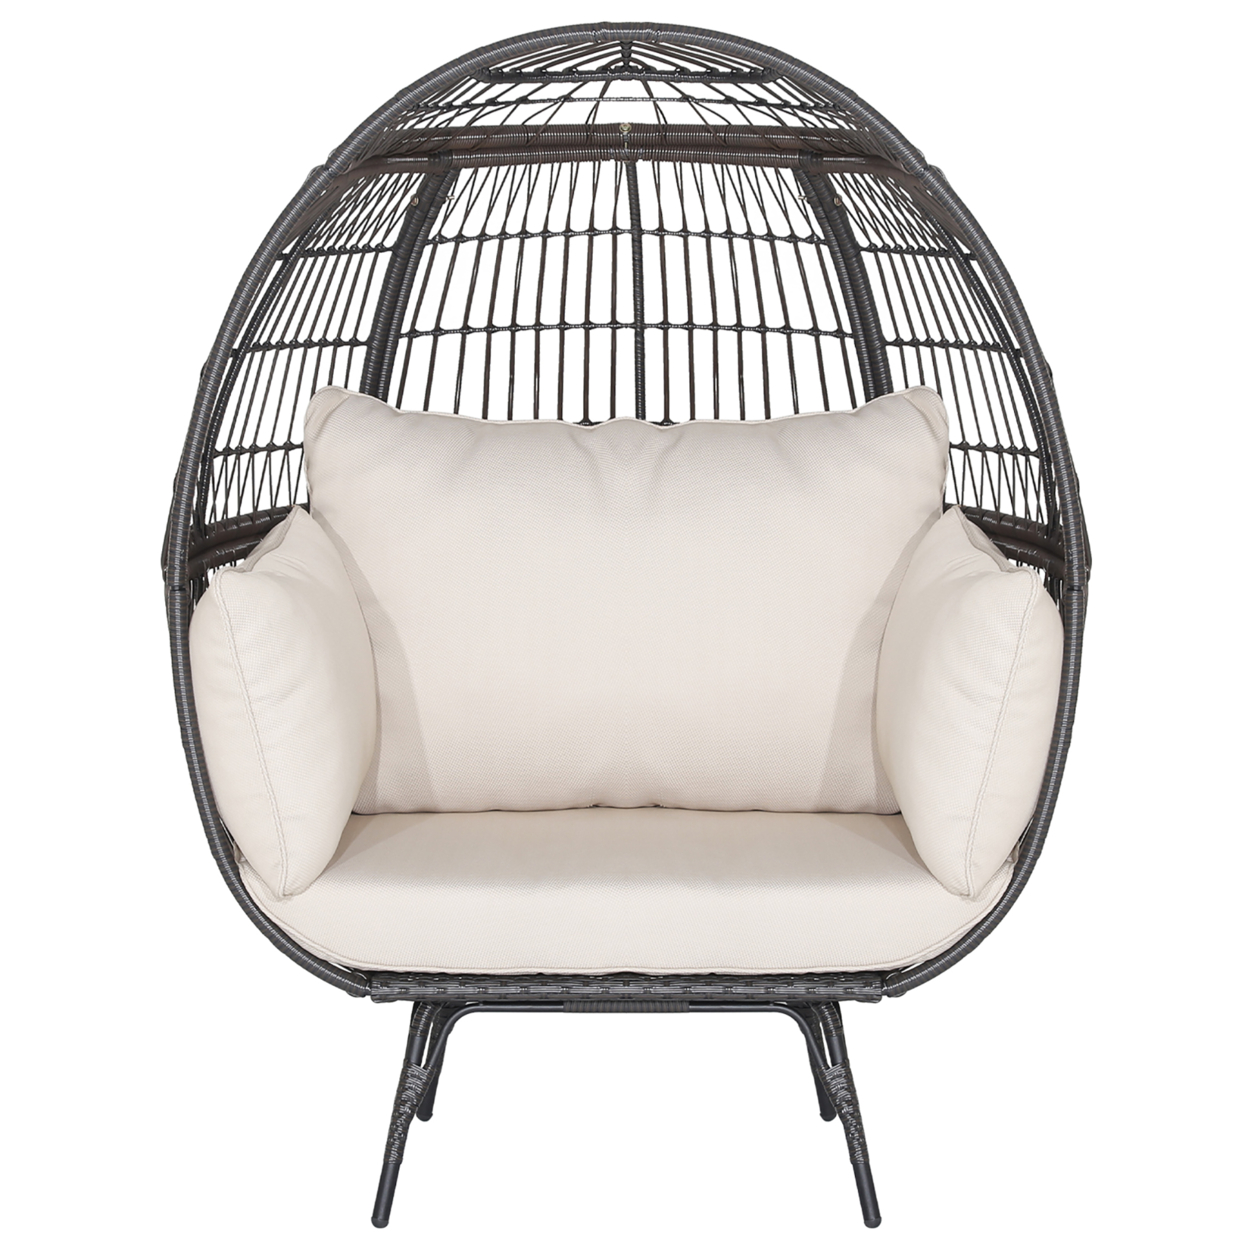 Patio Rattan Wicker Lounge Chair Oversized Outdoor Metal Frame Egg Chair W/ 4 Cushions